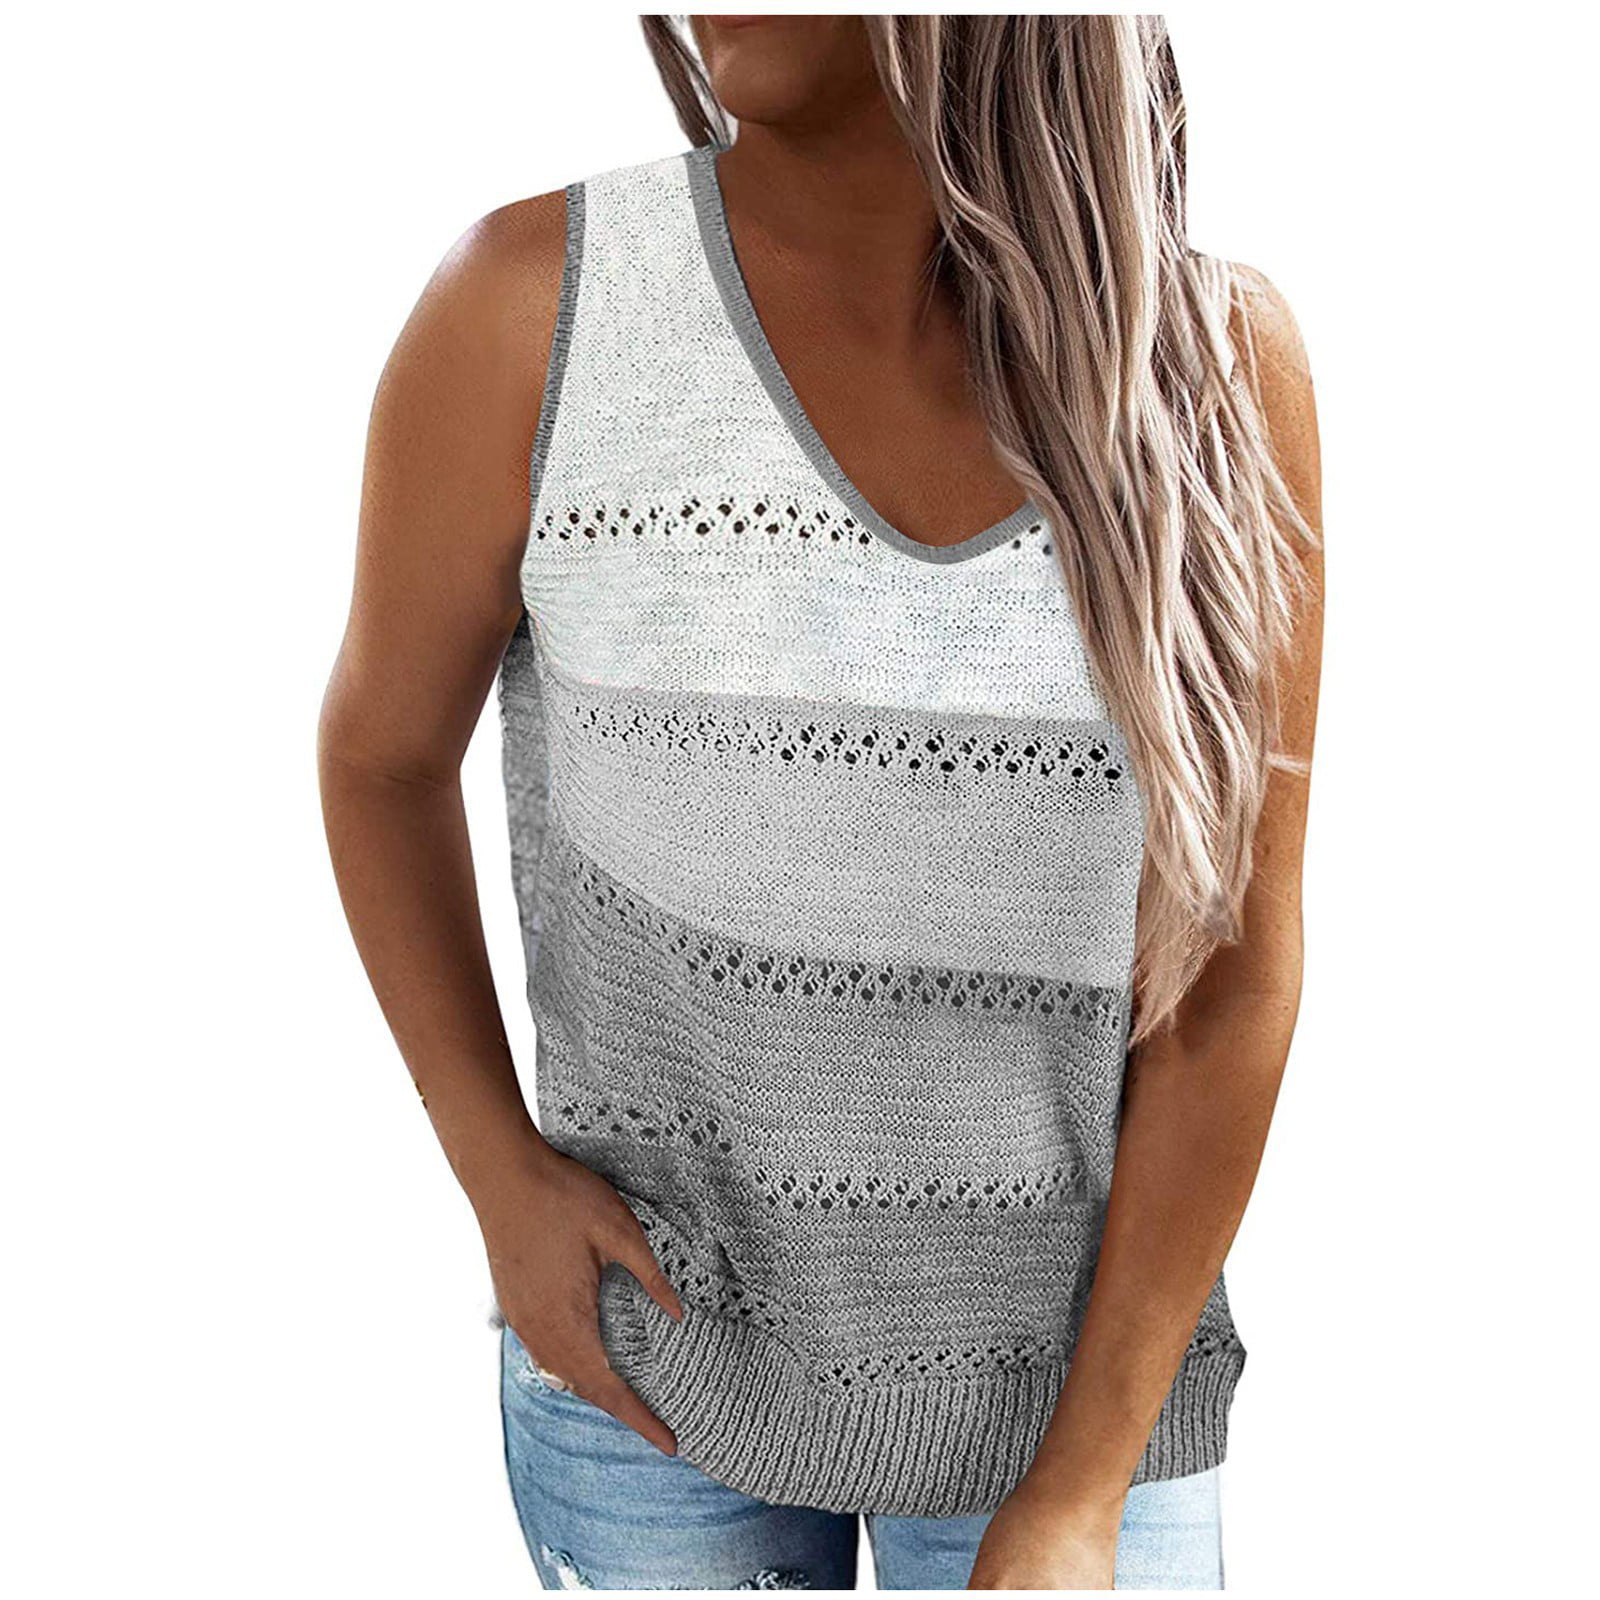 adviicd Tank Top Women's Reflective Crop Tops Festival Rave Outfits Girls  Club Tank Vest Grey M 